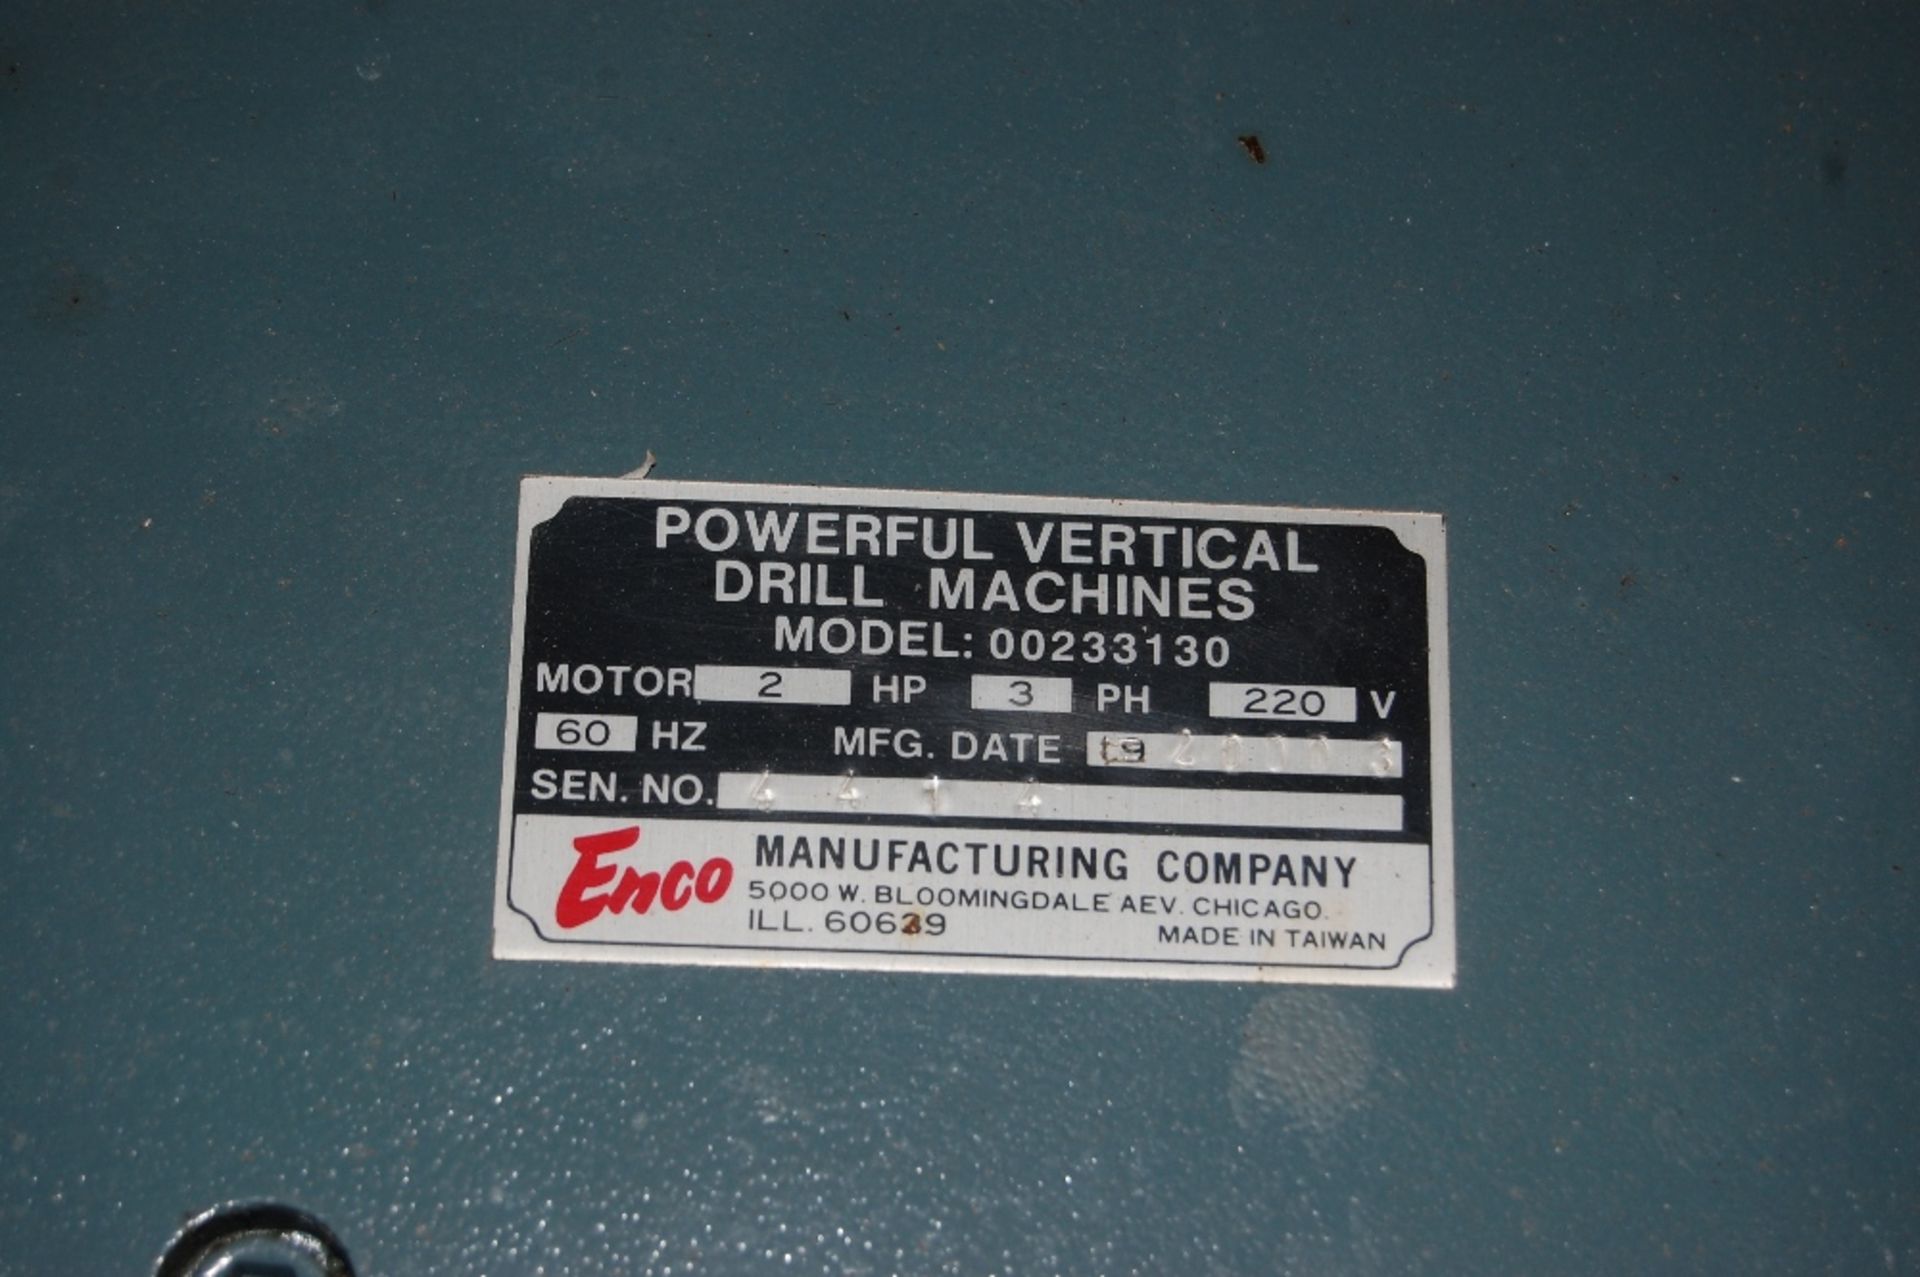 Large Enco drill press by powerful vertical drill machines mod 00233130 31x24x84" 2HP 220V 3 - Image 3 of 3